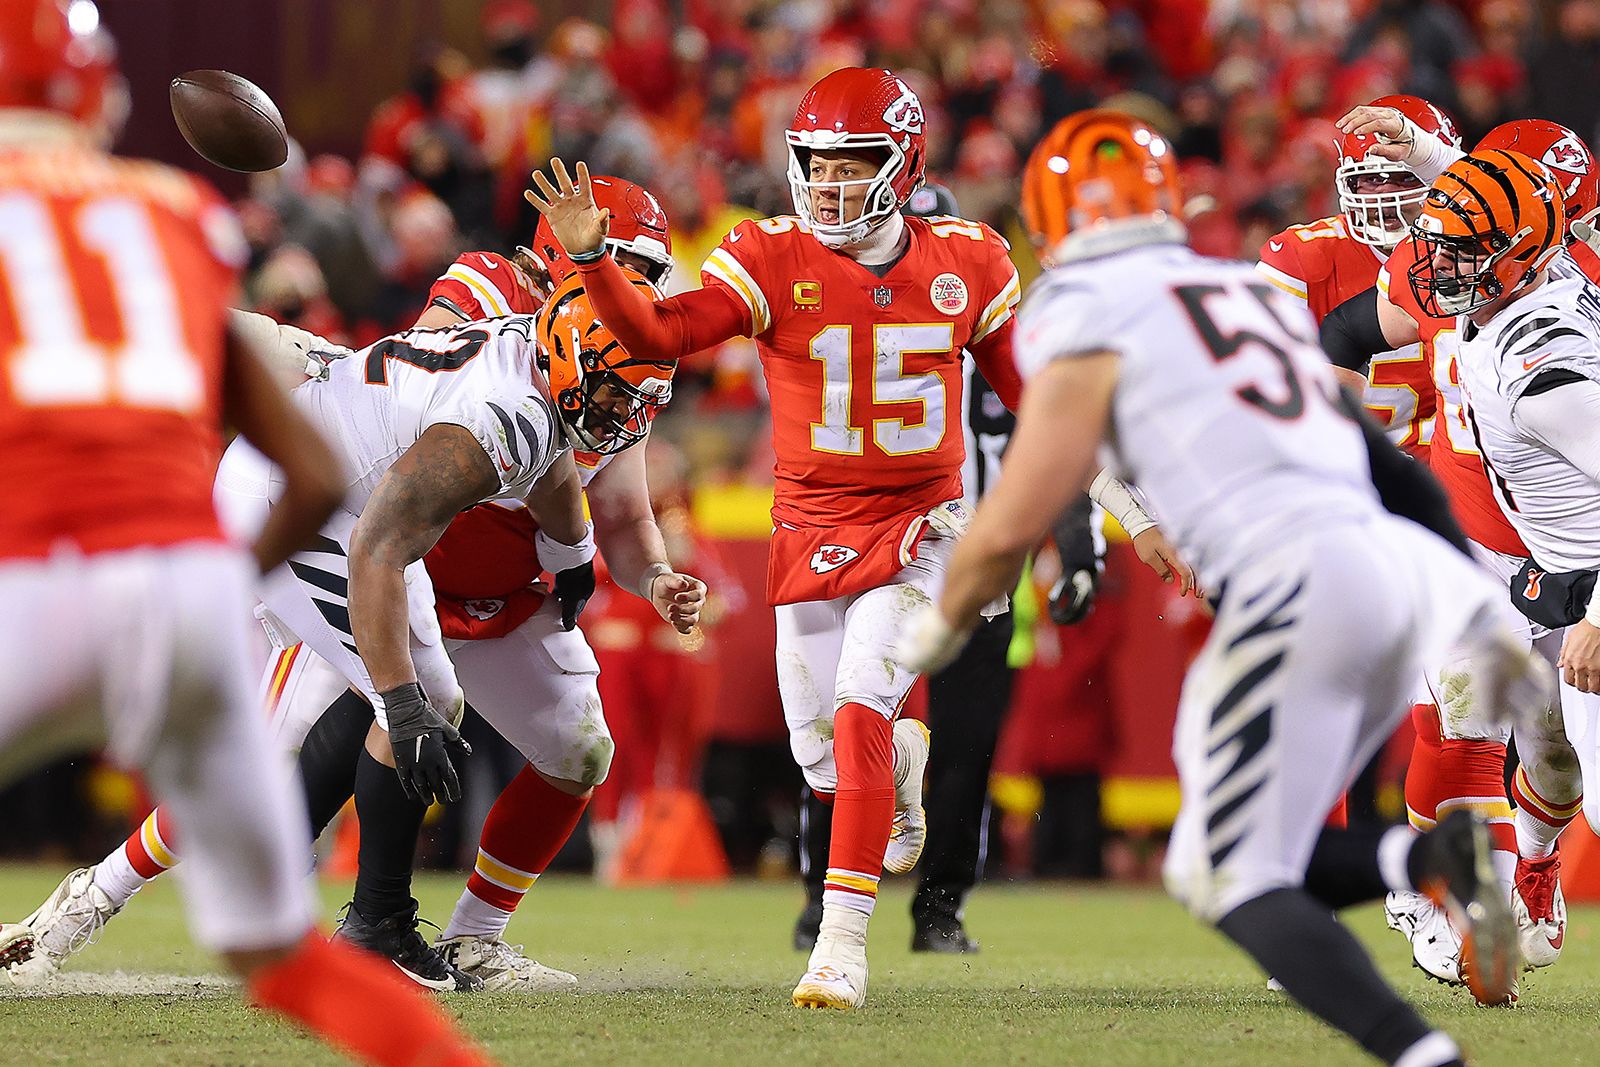 Mahomes throws a pass in the fourth quarter of the AFC Championship against the Cincinnati Bengals. He led his team to a 23-20 victory.